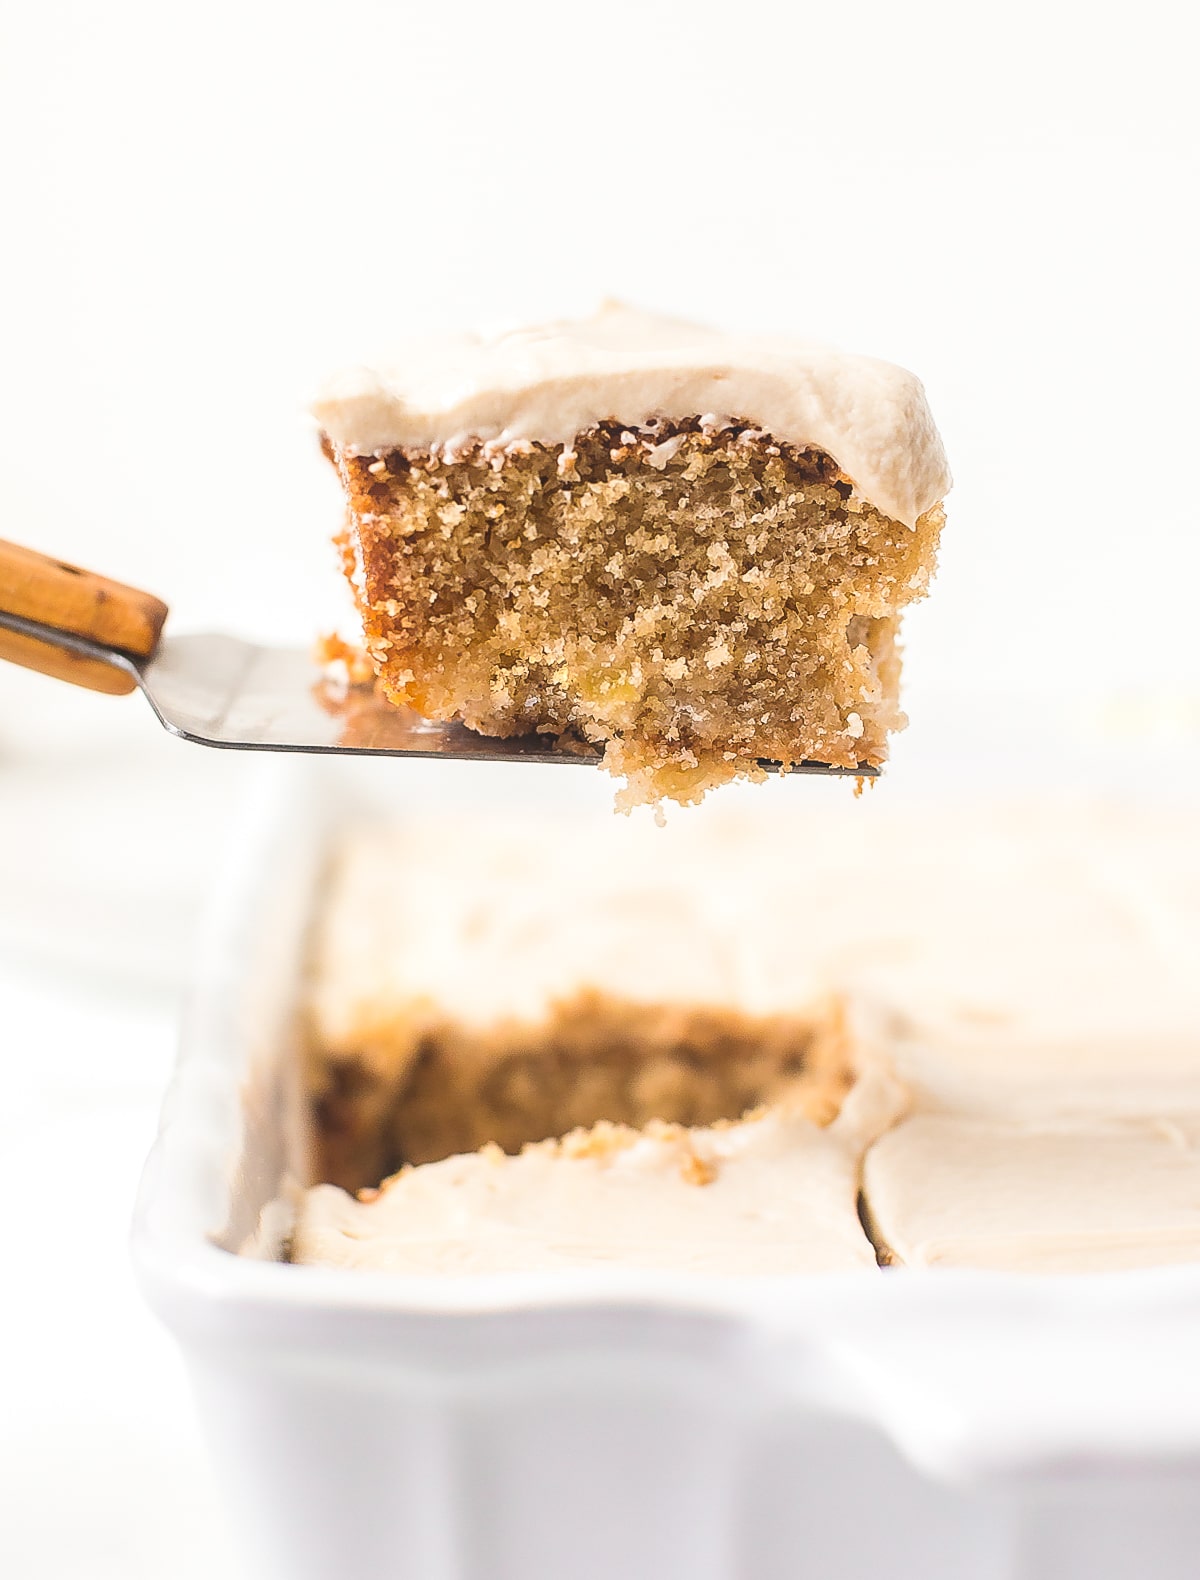 Easy Apple Cake with Salted Caramel Frosting on #ASpicyPerspective #apple #cake #caramel #frosting #caramelapple #sheetcake